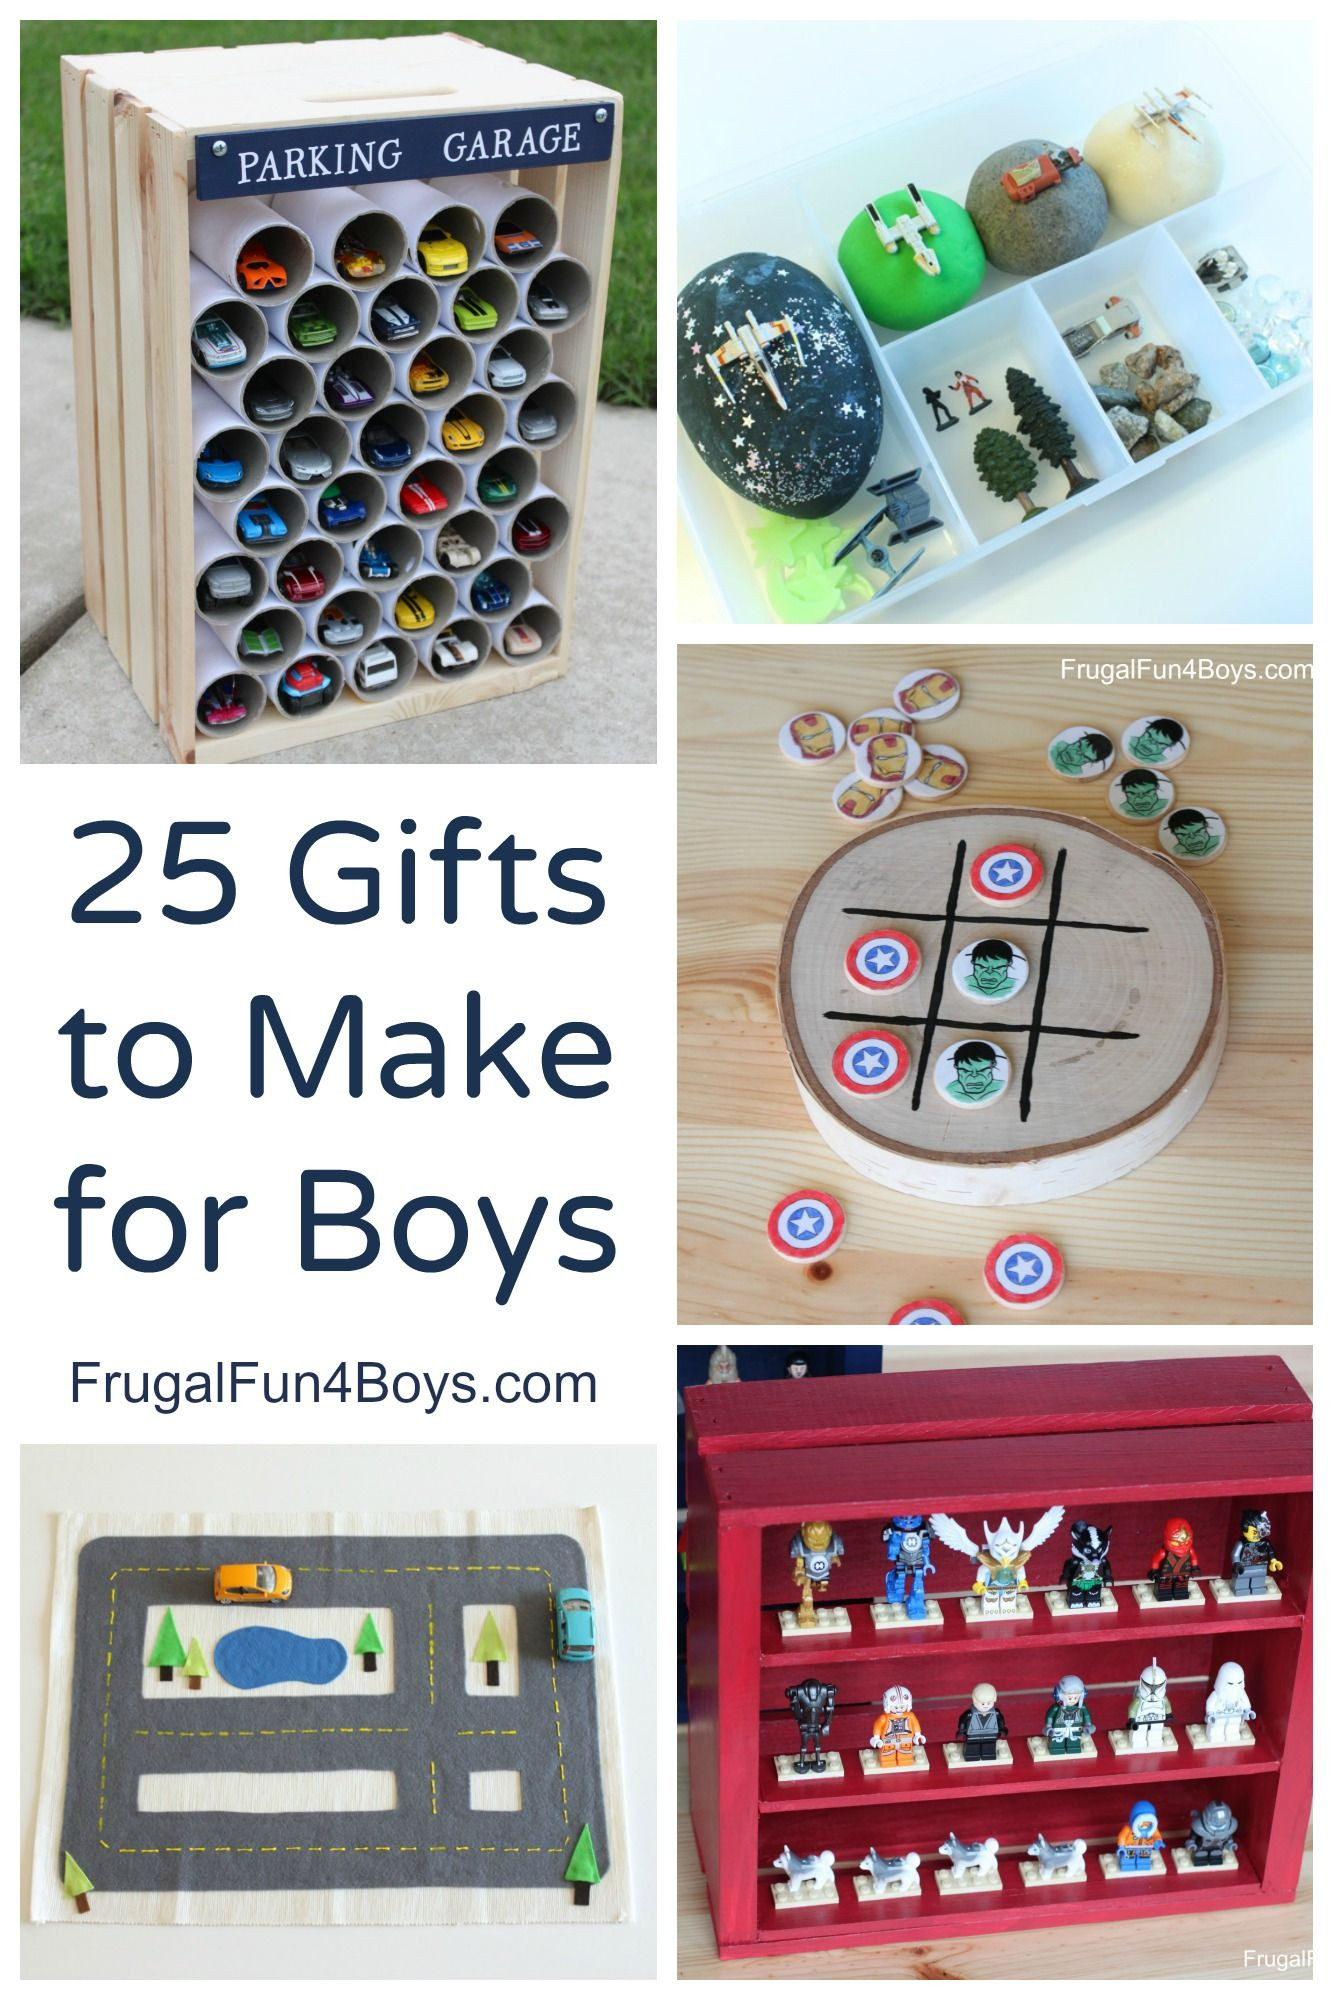 Boys Birthday Gifts
 25 More Homemade Gifts to Make for Boys